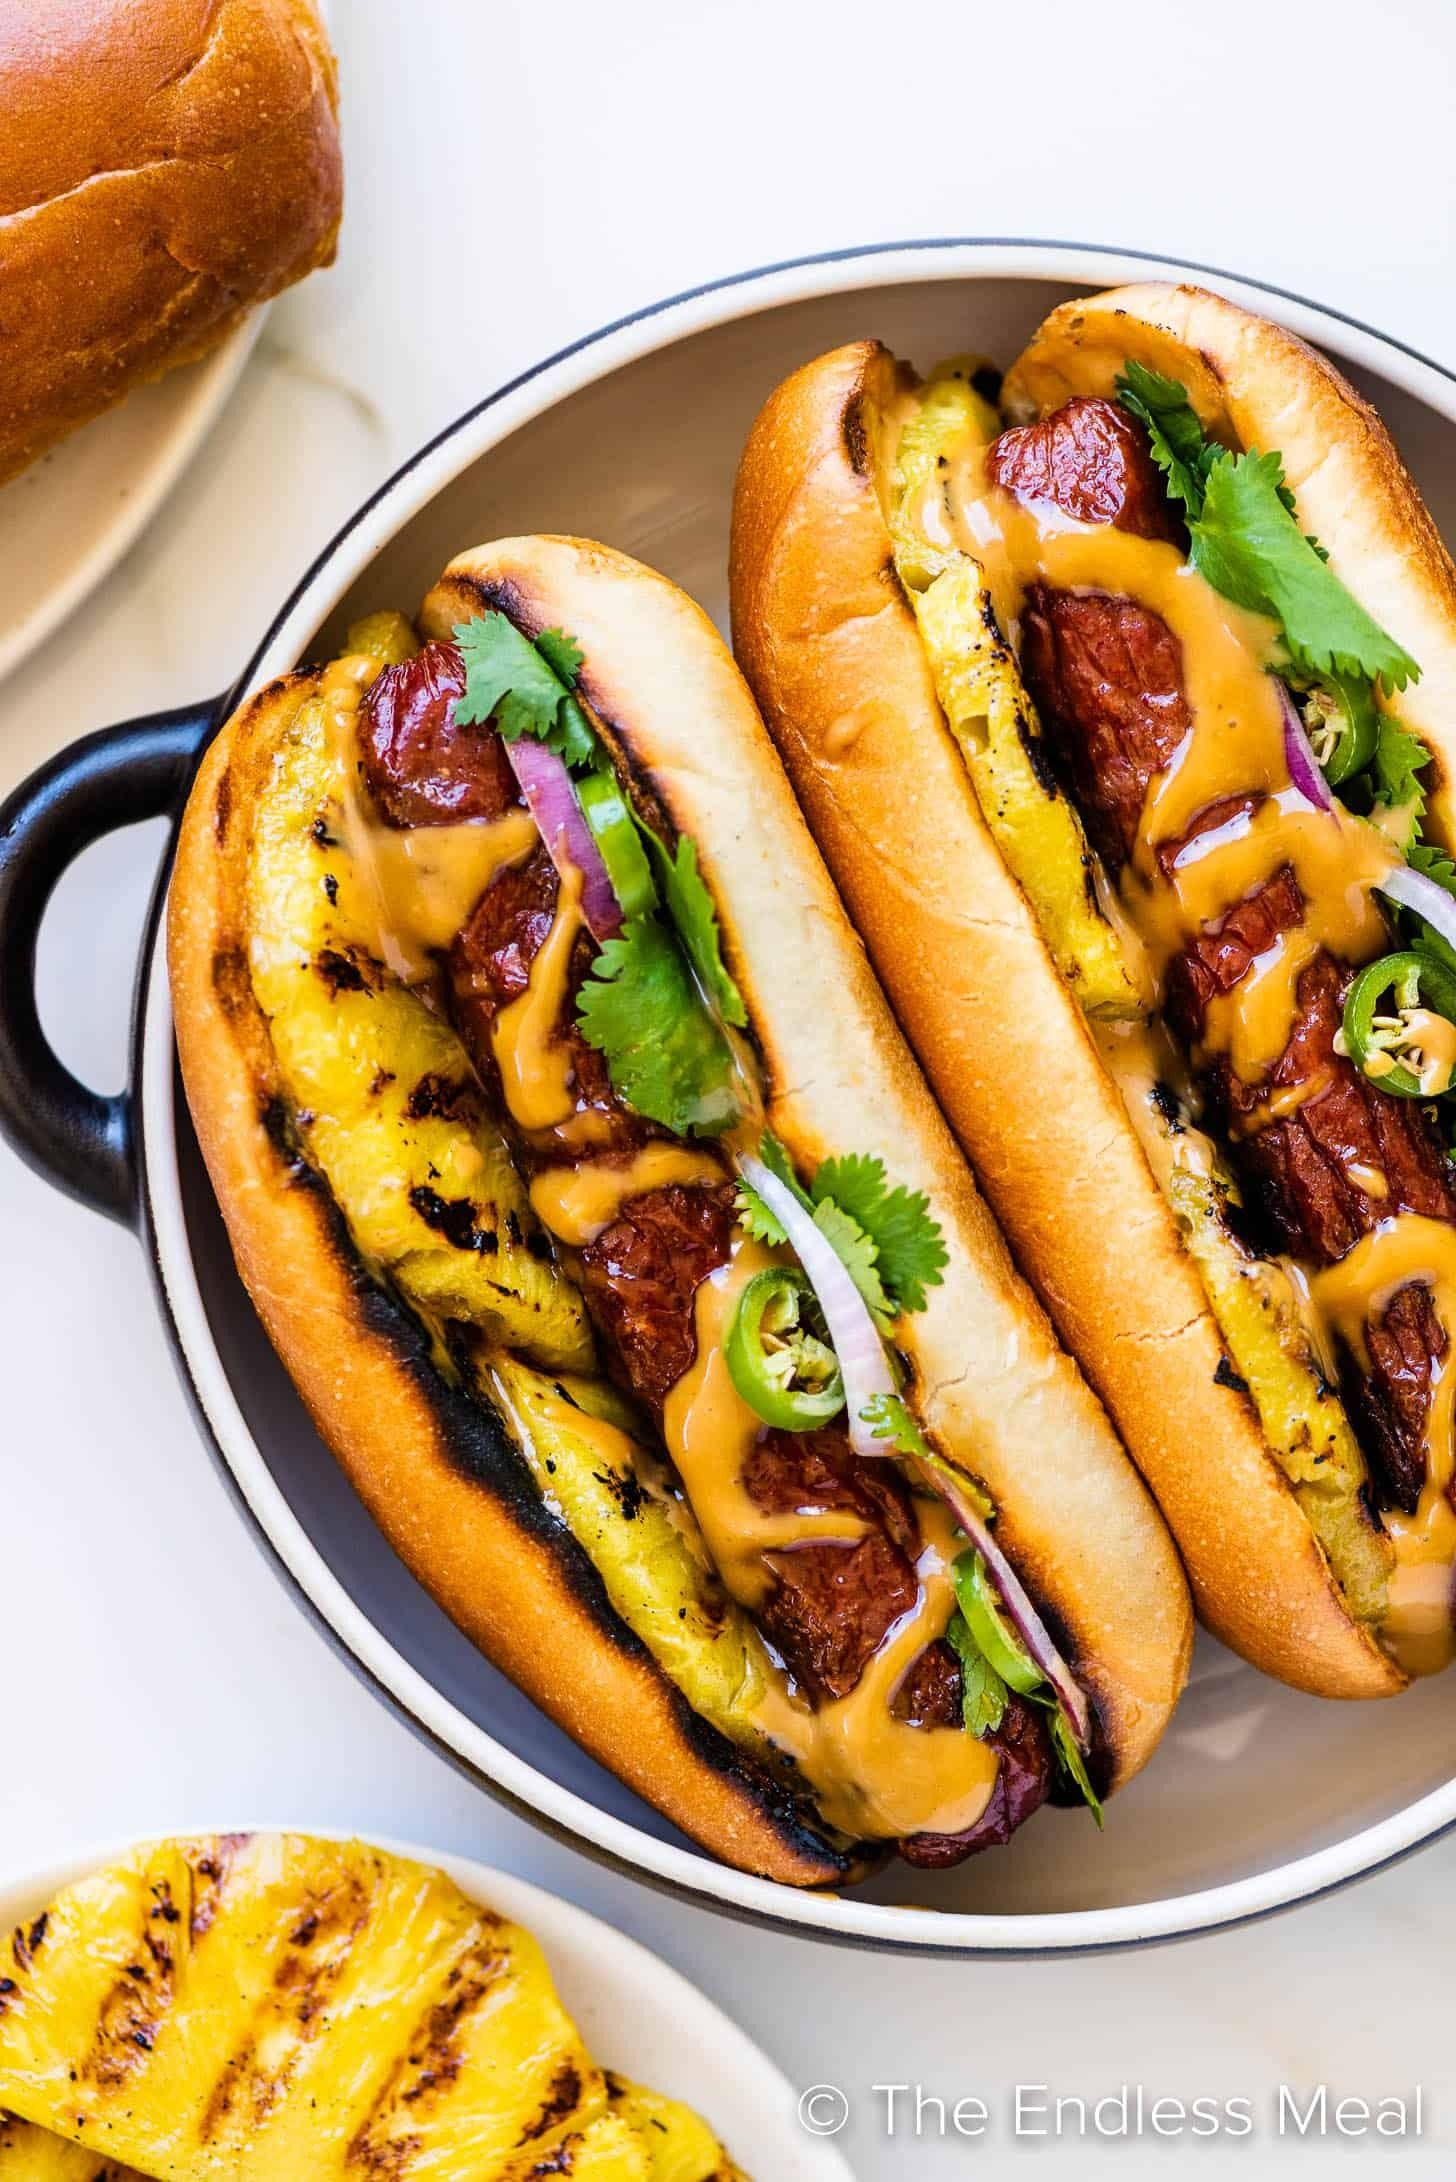 Best Hot Dog Recipes - Weekend at the Cottage, Recipe